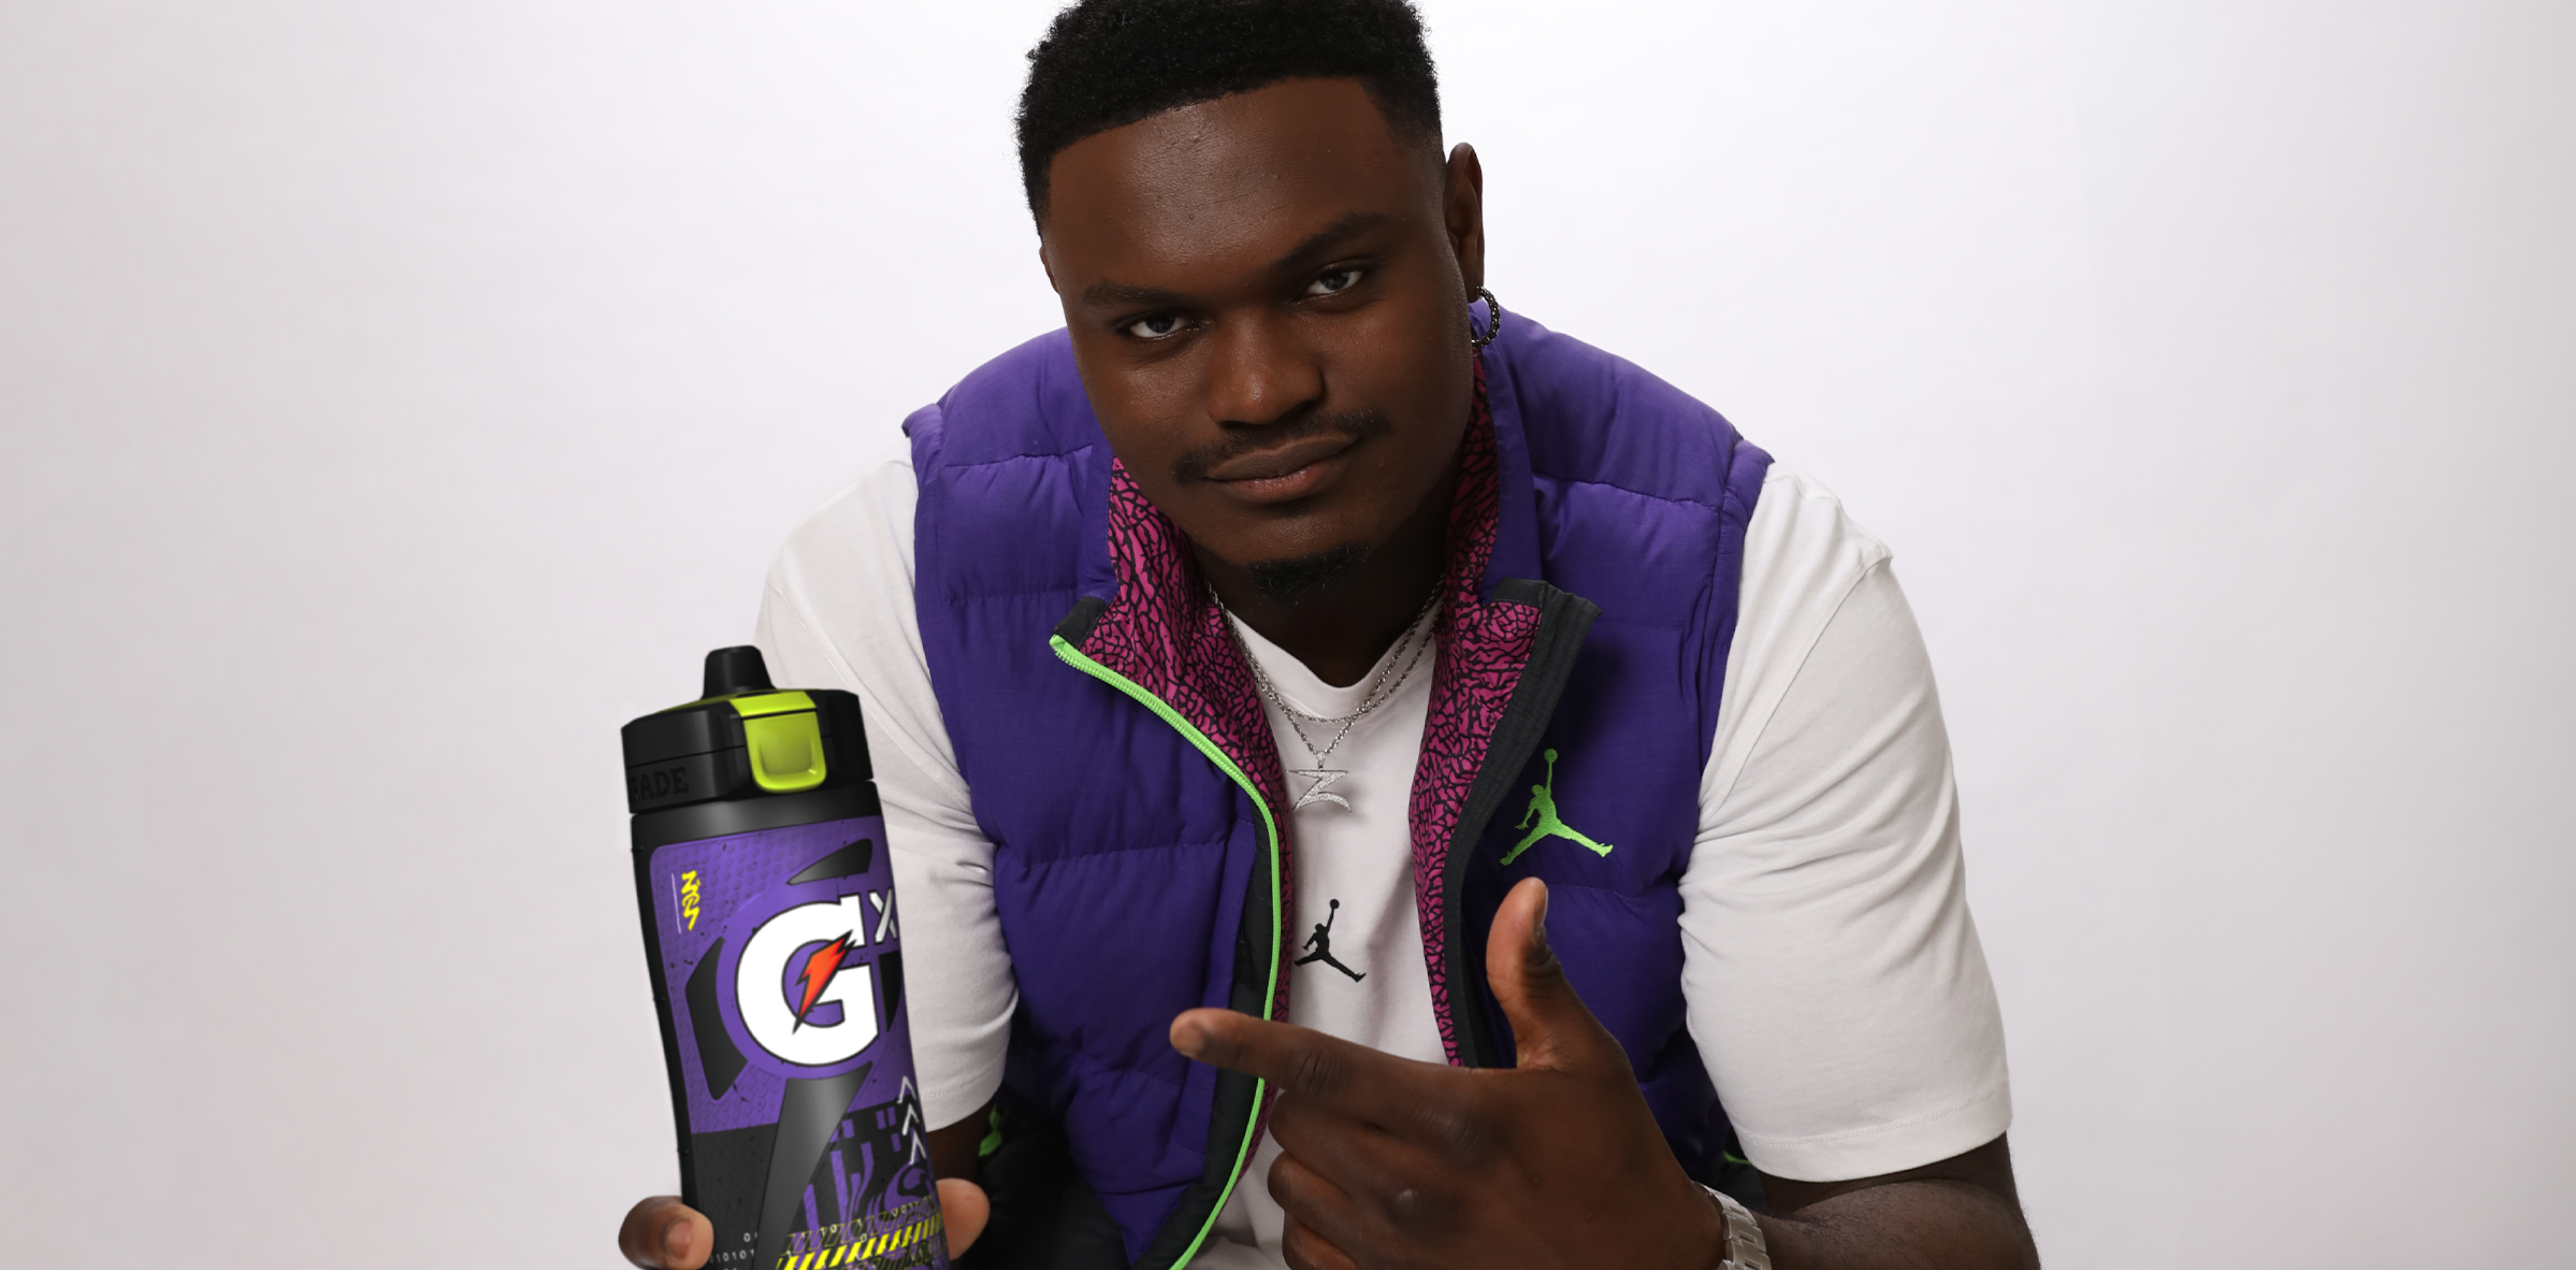 Zion pointing to the Zion Williamson Smart Bottle